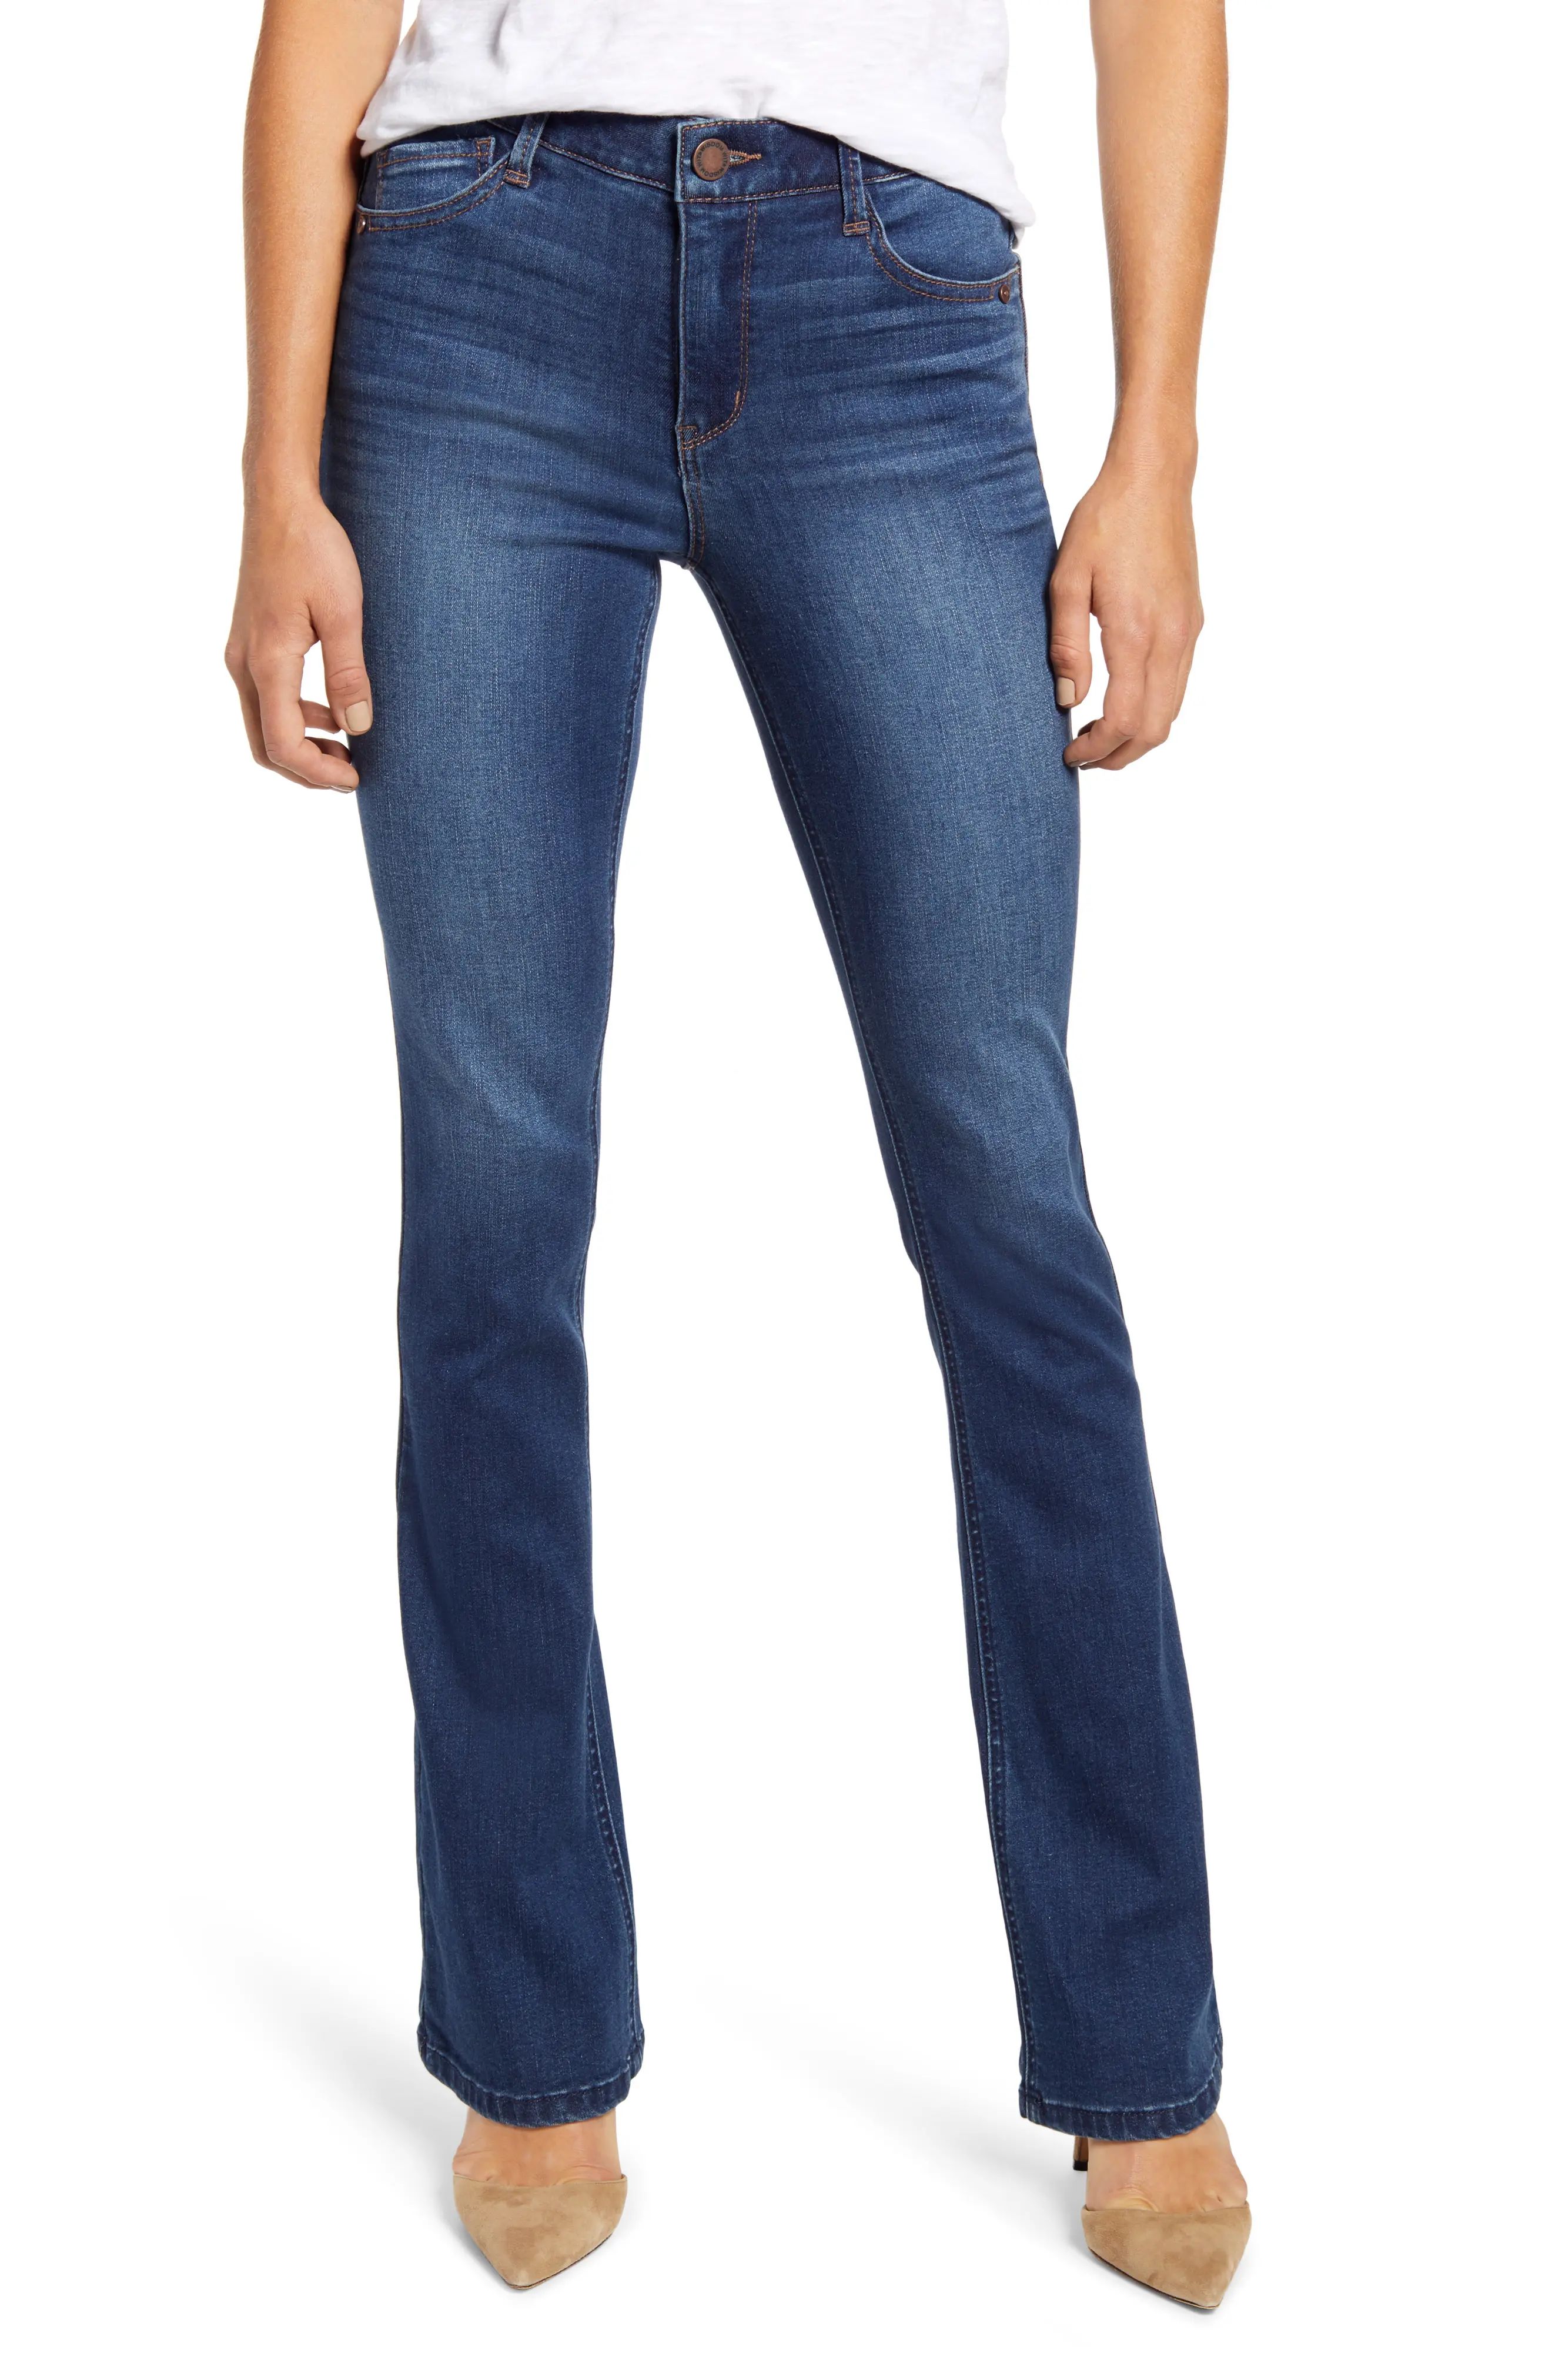 Wit & Wisdom Ab-Solution High Waist Itty Bitty Bootcut Jeans in Blue at Nordstrom, Size 16 | Nordstrom